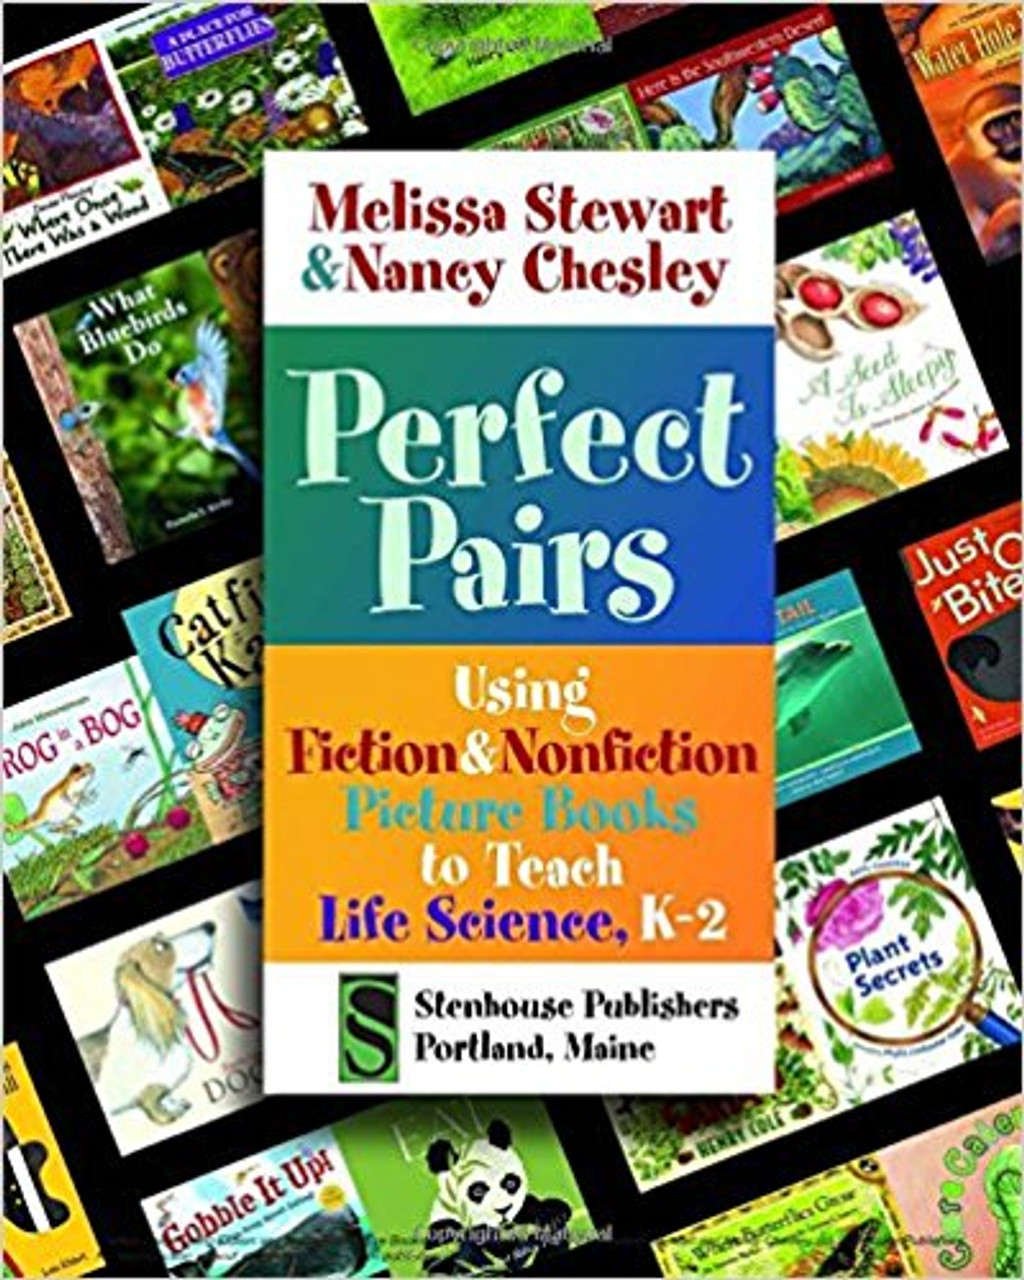 Perfect Pairs: Using Fiction & Nonfiction Picture Books to Teach Life Science, K-2 by Melissa Stewart